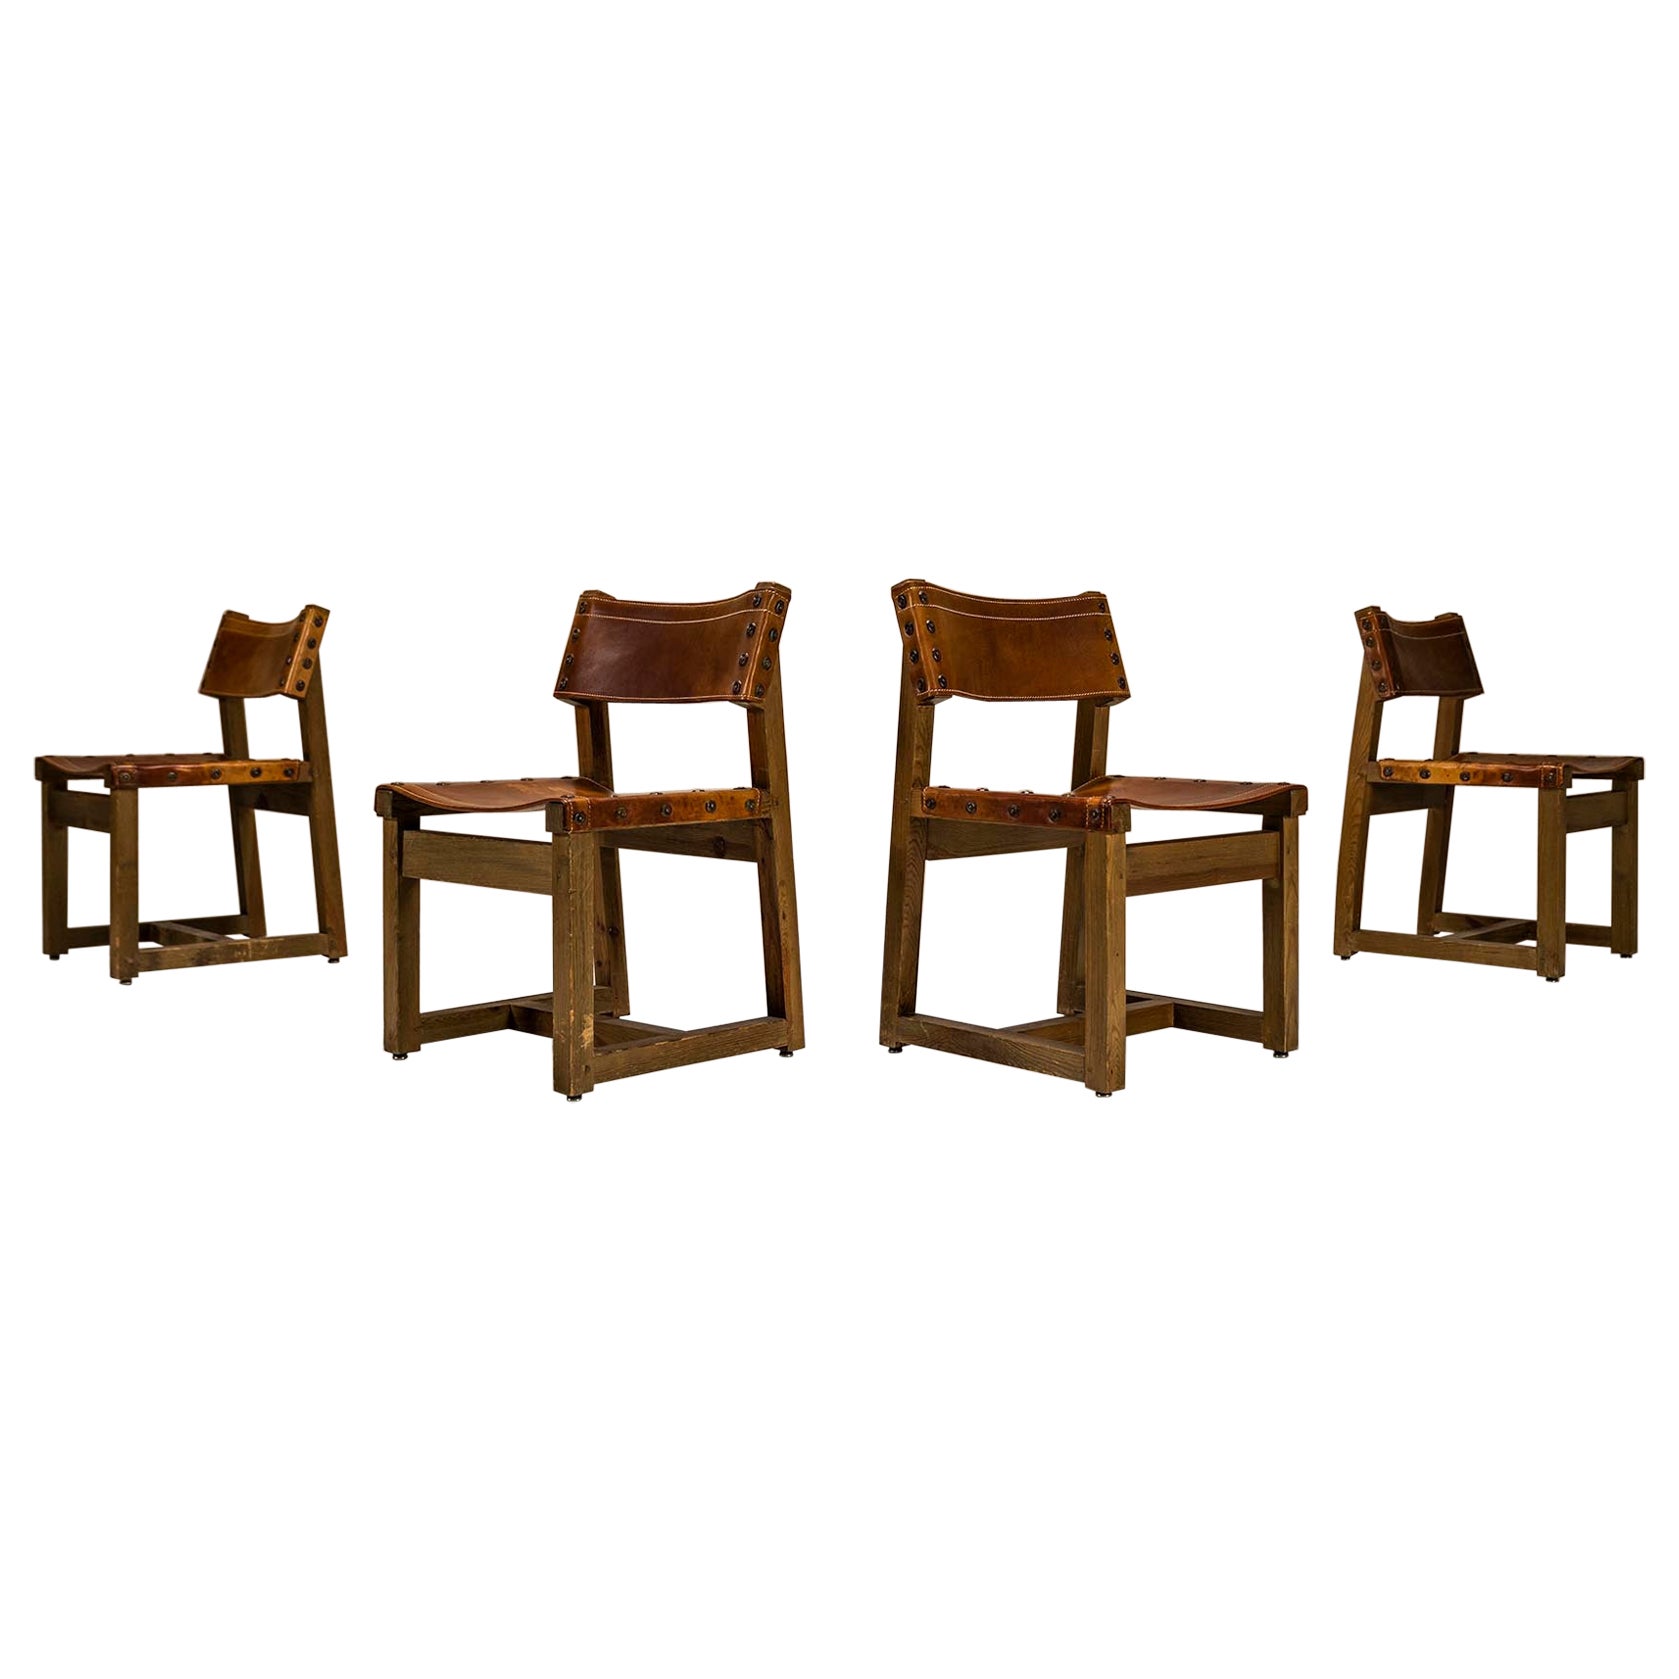 Biosca Set of 4 Chairs in Pine and Cognac Saddle Leather, Spain, 1960s